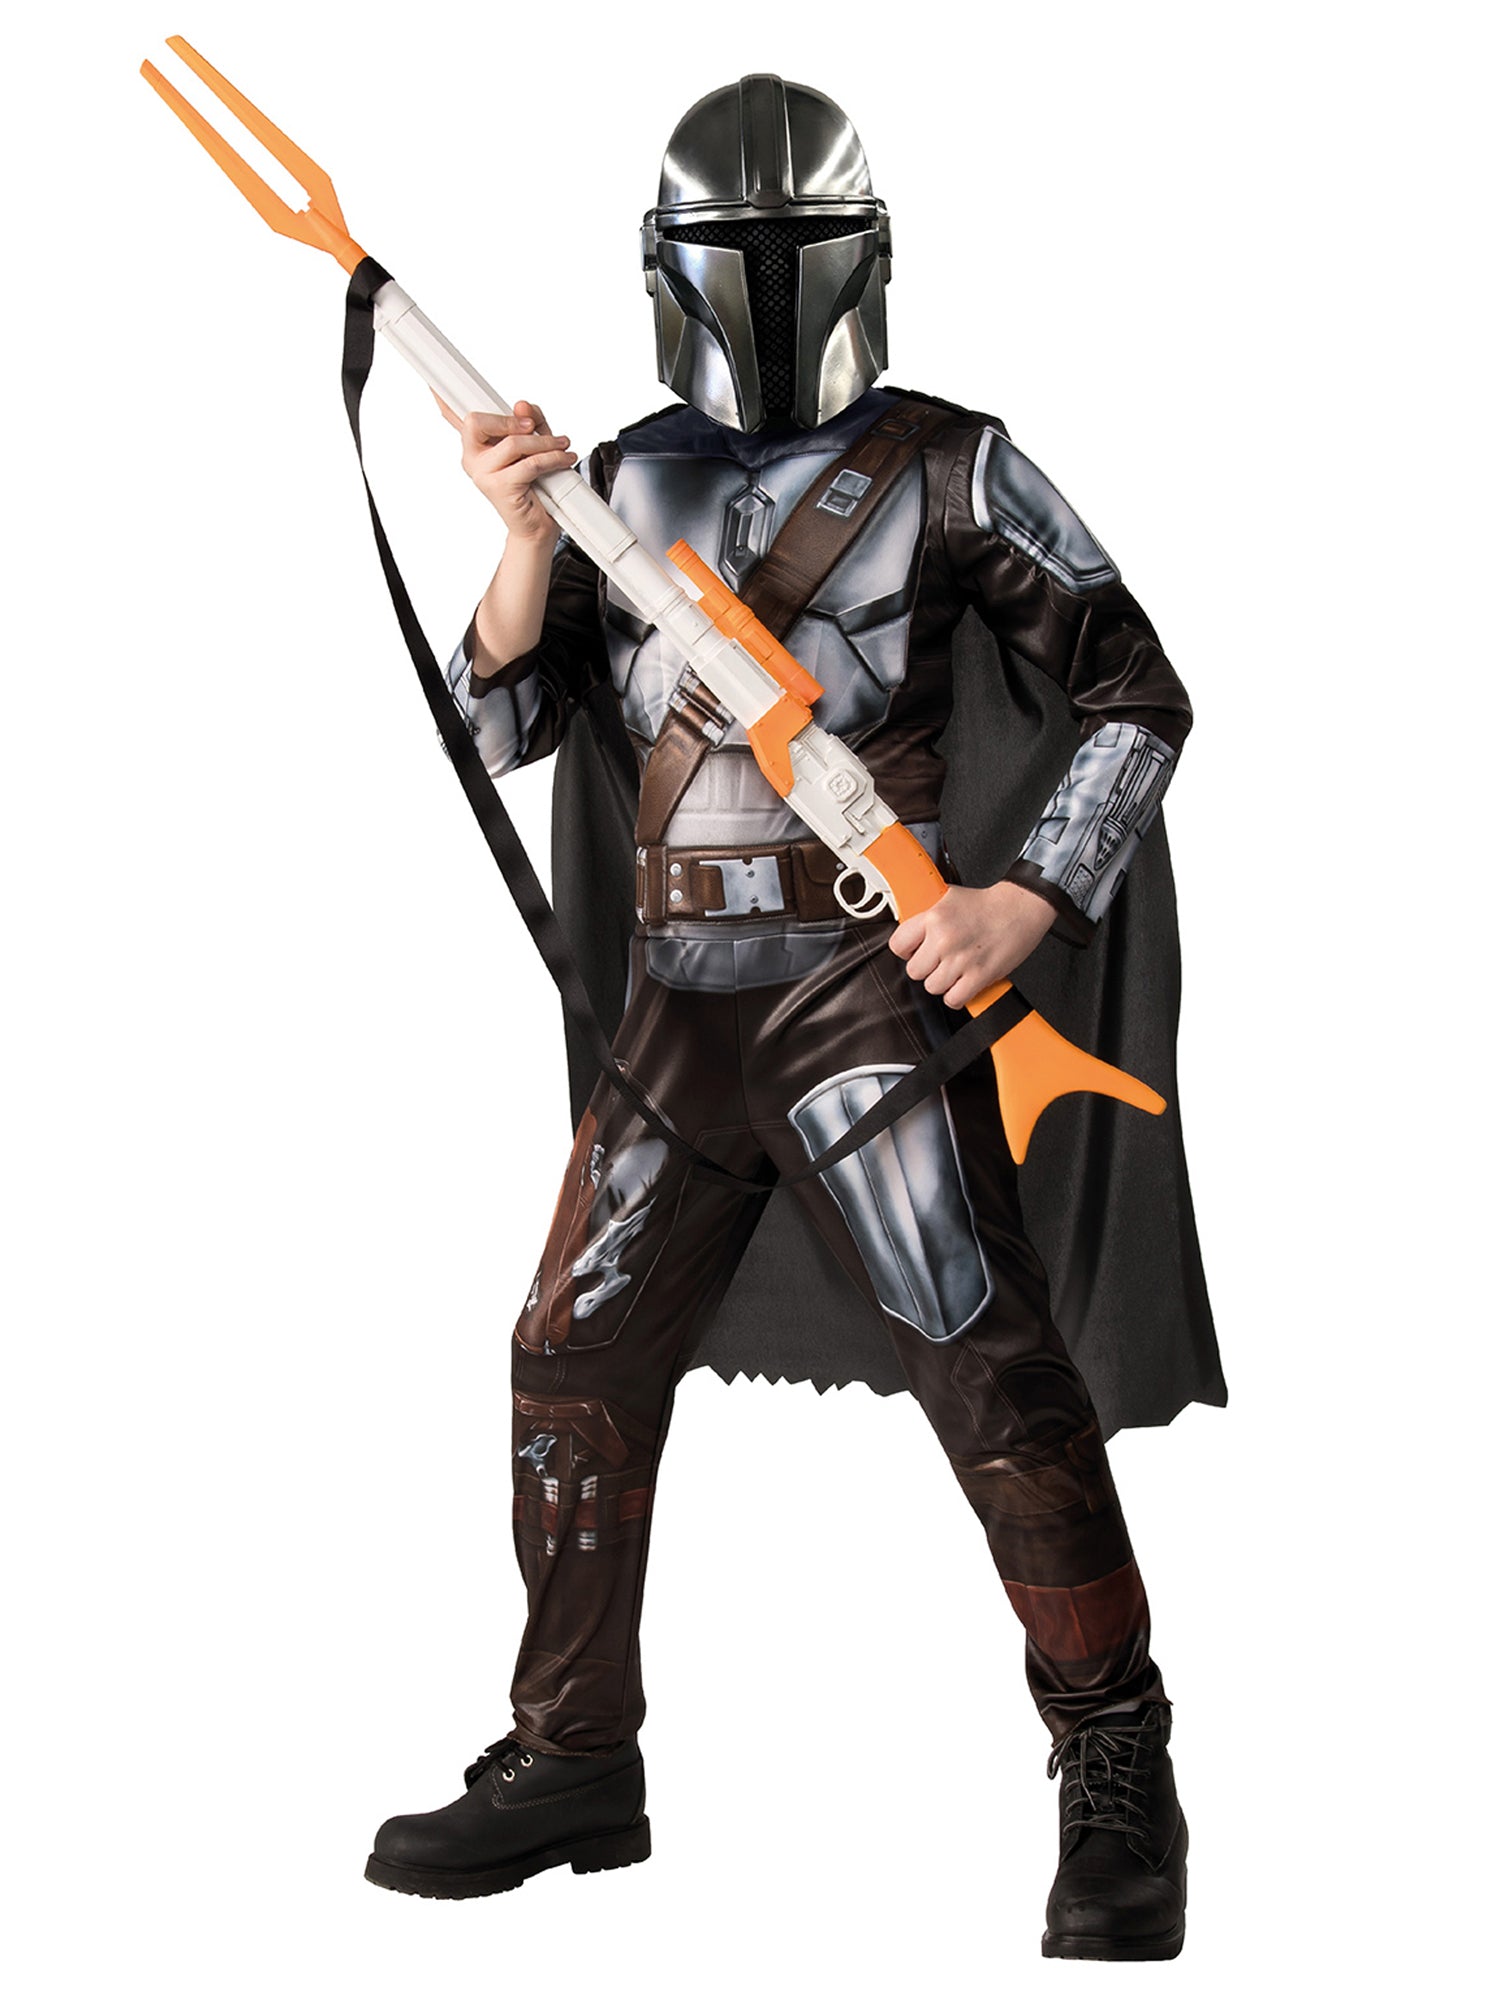 Mandalorian, Mandalorian, Mandalorian, Multi, Star Wars, Kids Costumes, Small, Front